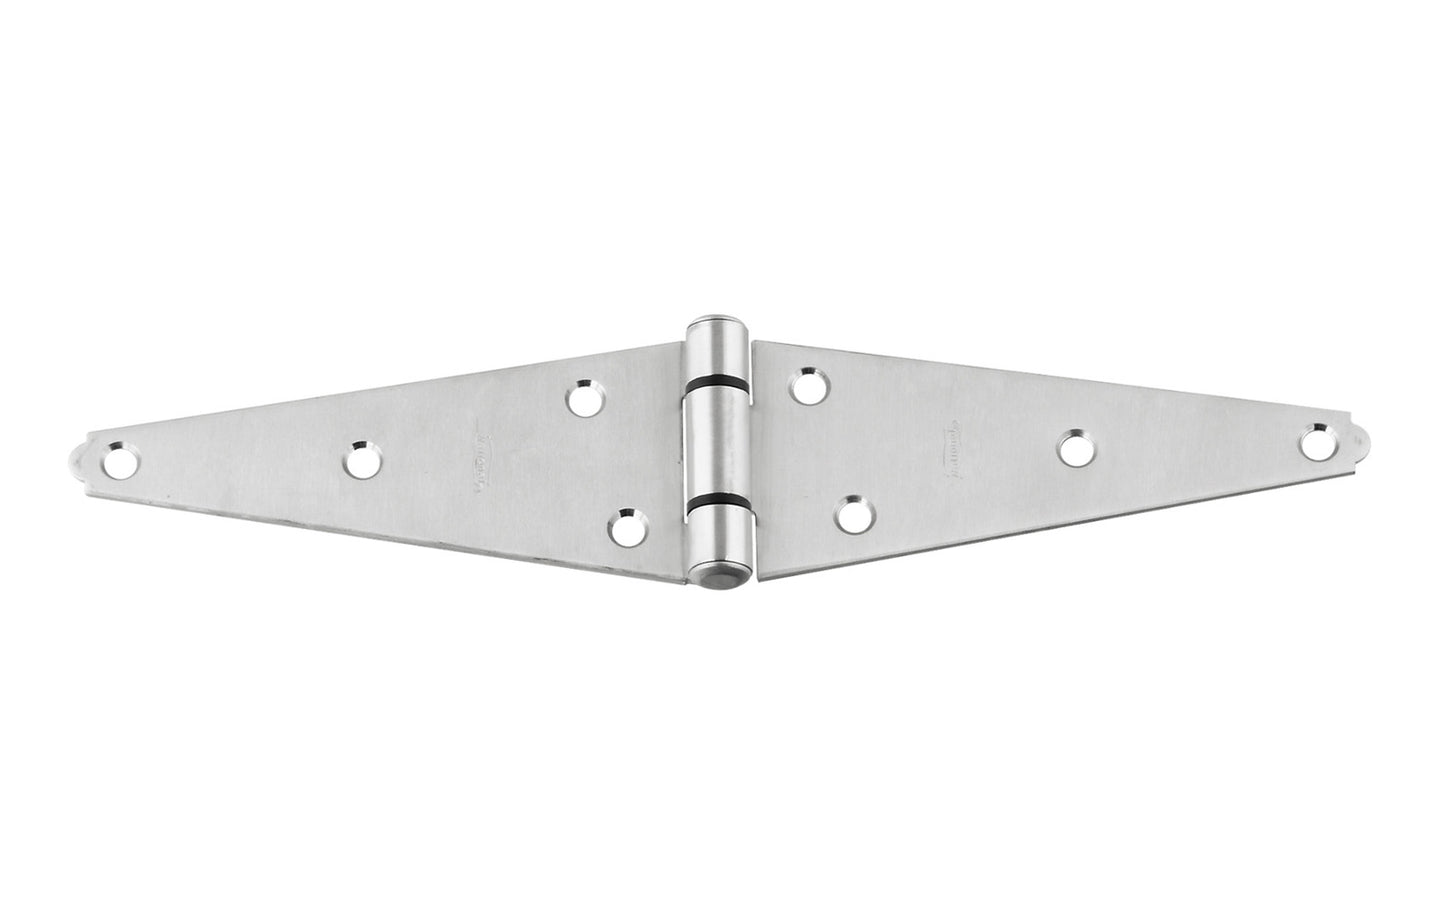 Heavy duty stainless strap hinge is for applications with wide mounting surfaces. Tight pin for right or left hand applications. Rust-resistant; ACQ safe - safe for use with premium woods like cedar & redwood. Bearing design eliminates metal-to-metal contact for smooth, quiet operation. 6" Size